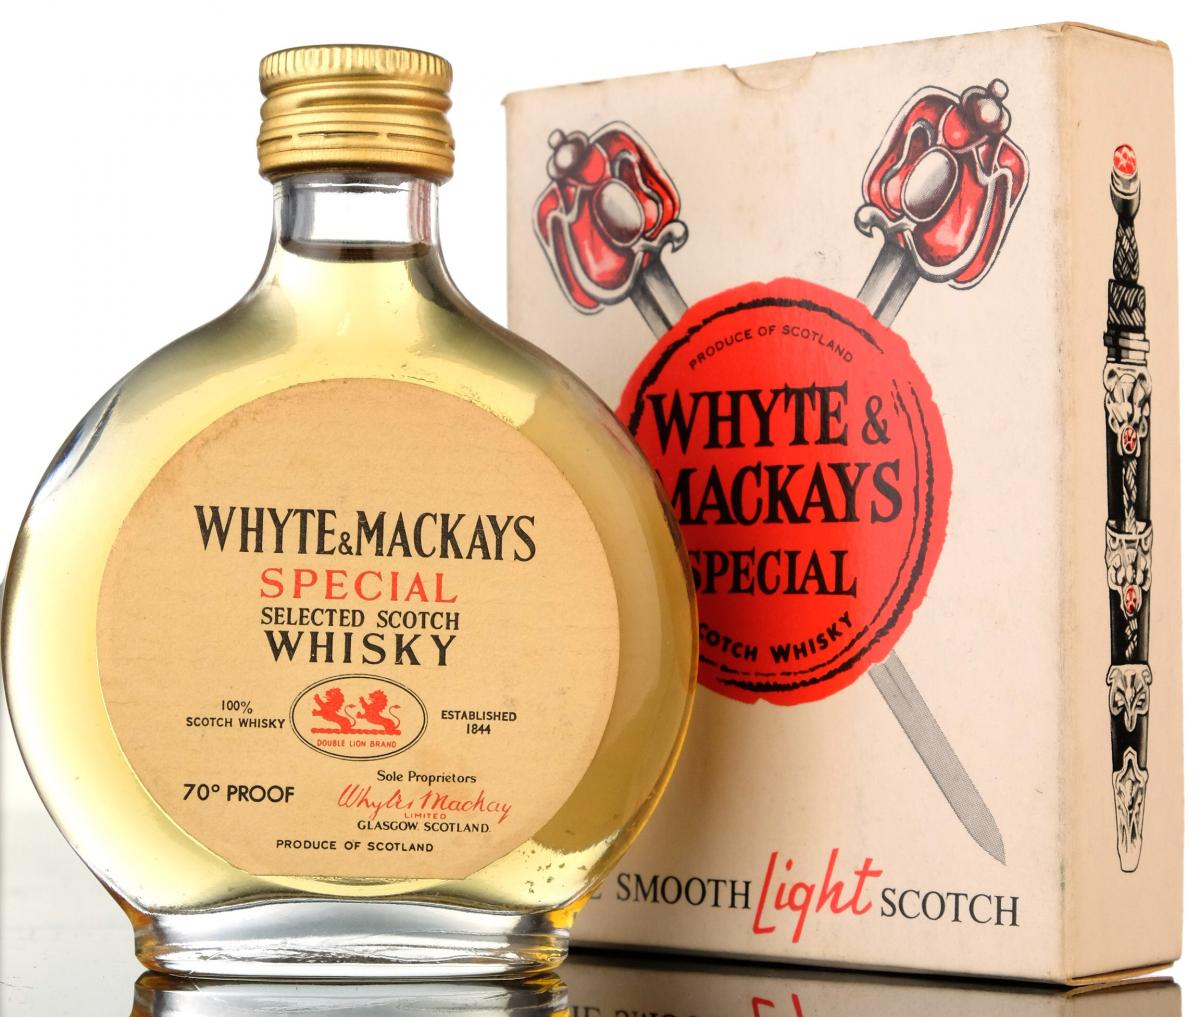 Whyte & Mackays Special Miniature